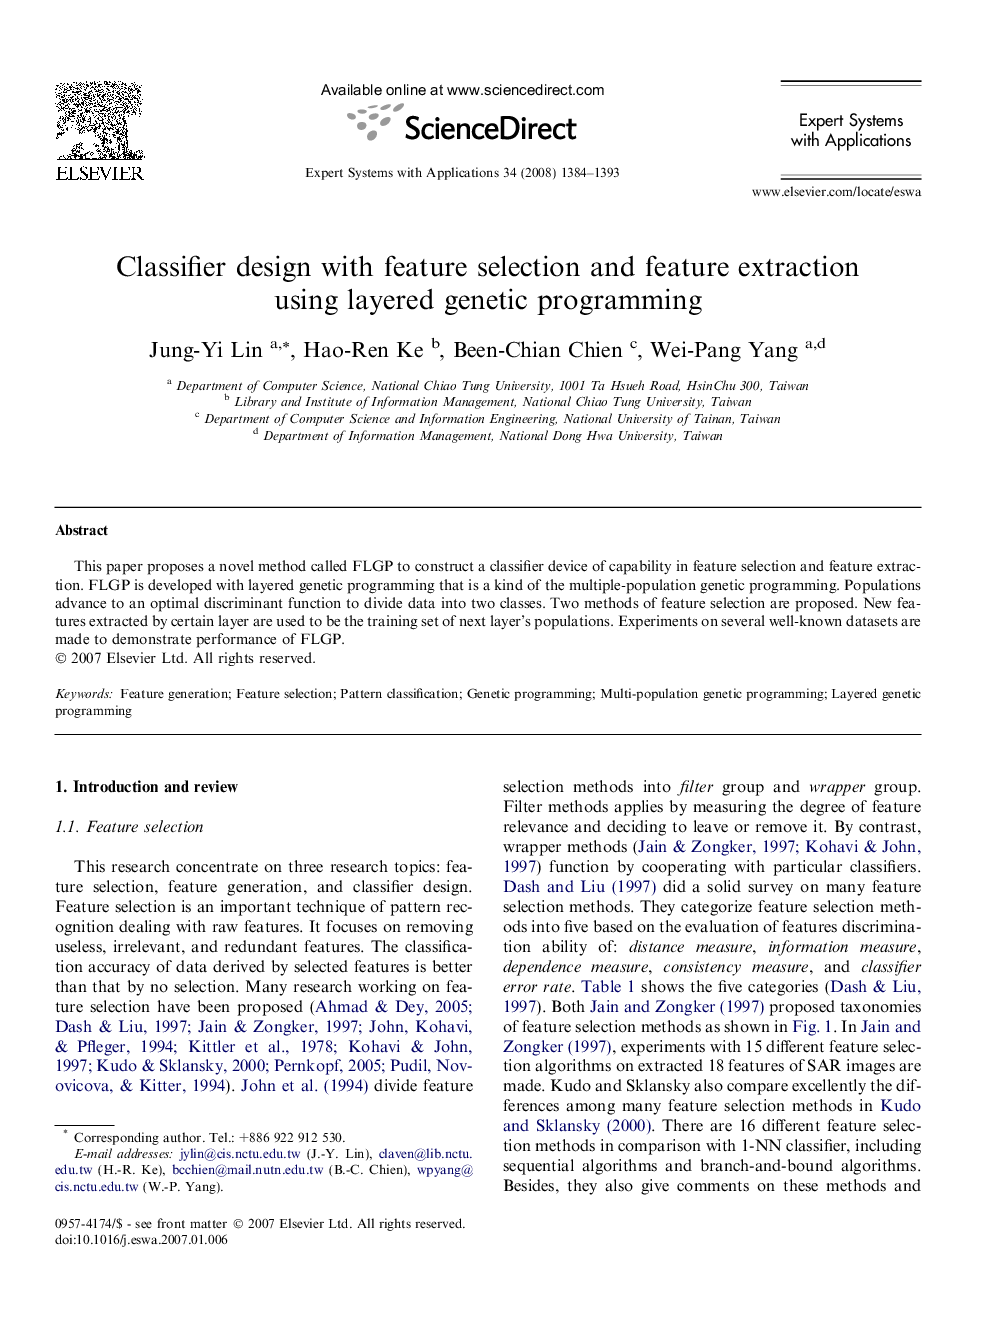 Classifier design with feature selection and feature extraction using layered genetic programming